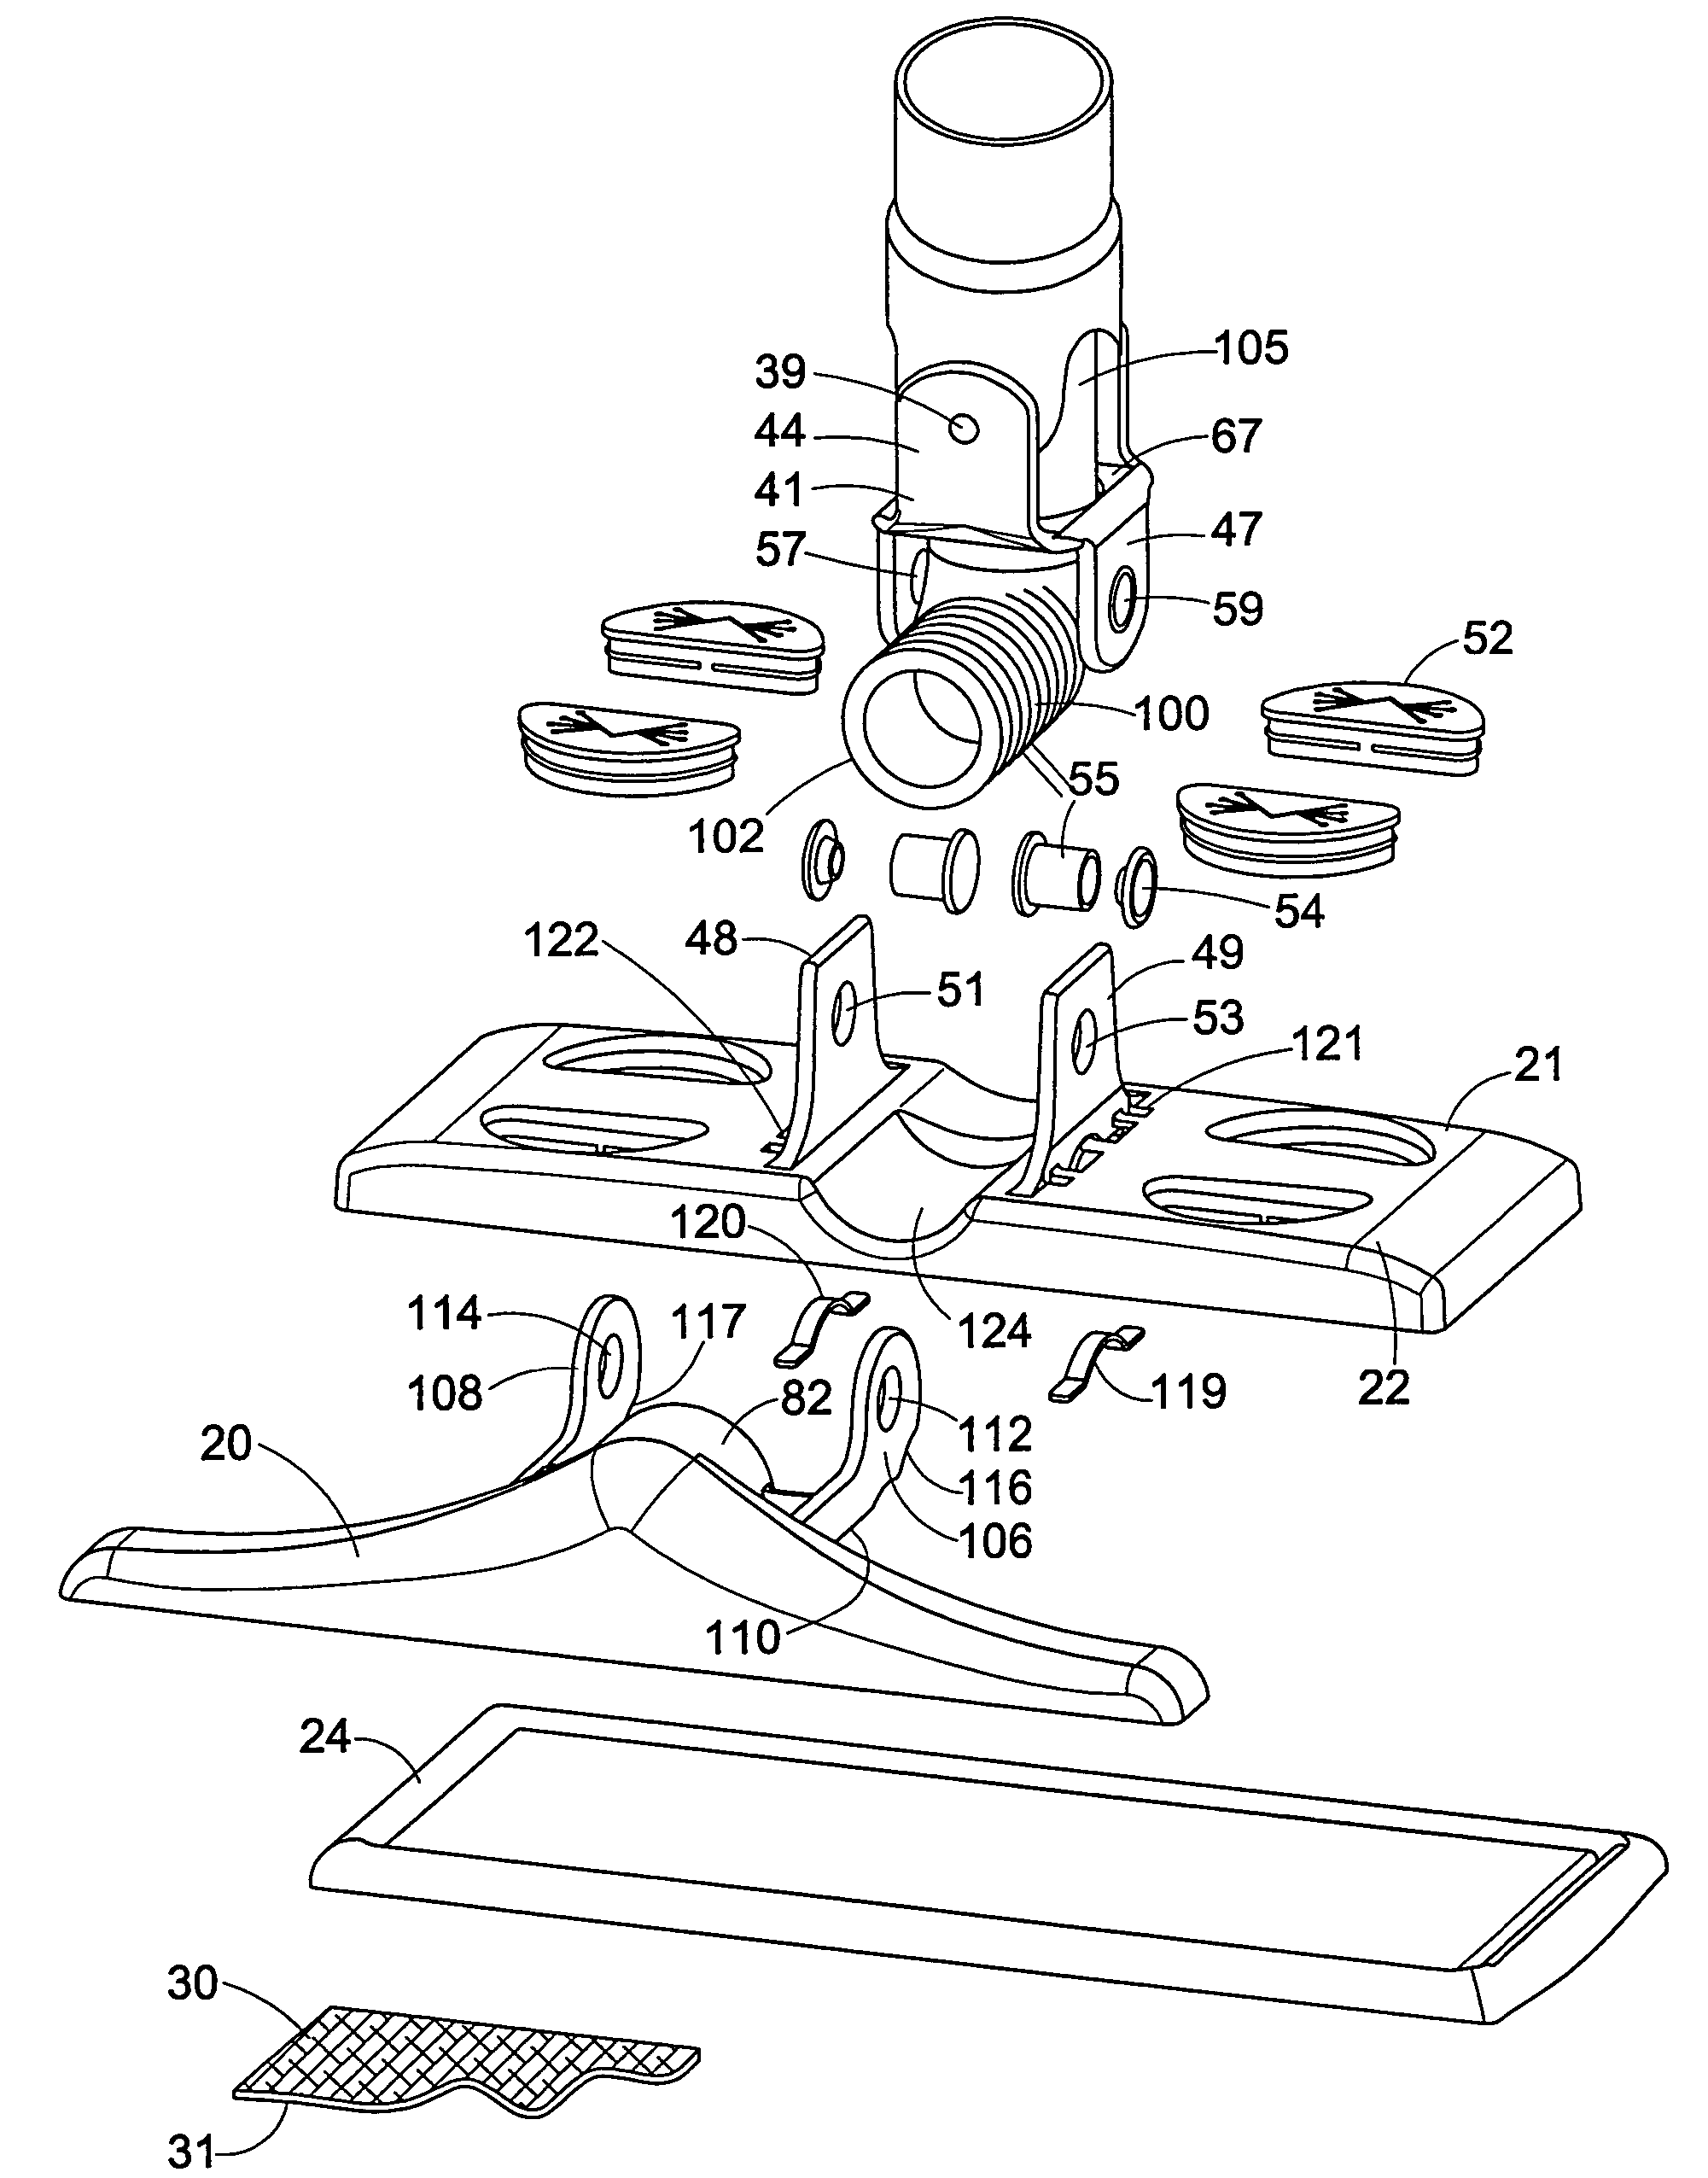 Cleaning attachment for vacuum cleaner